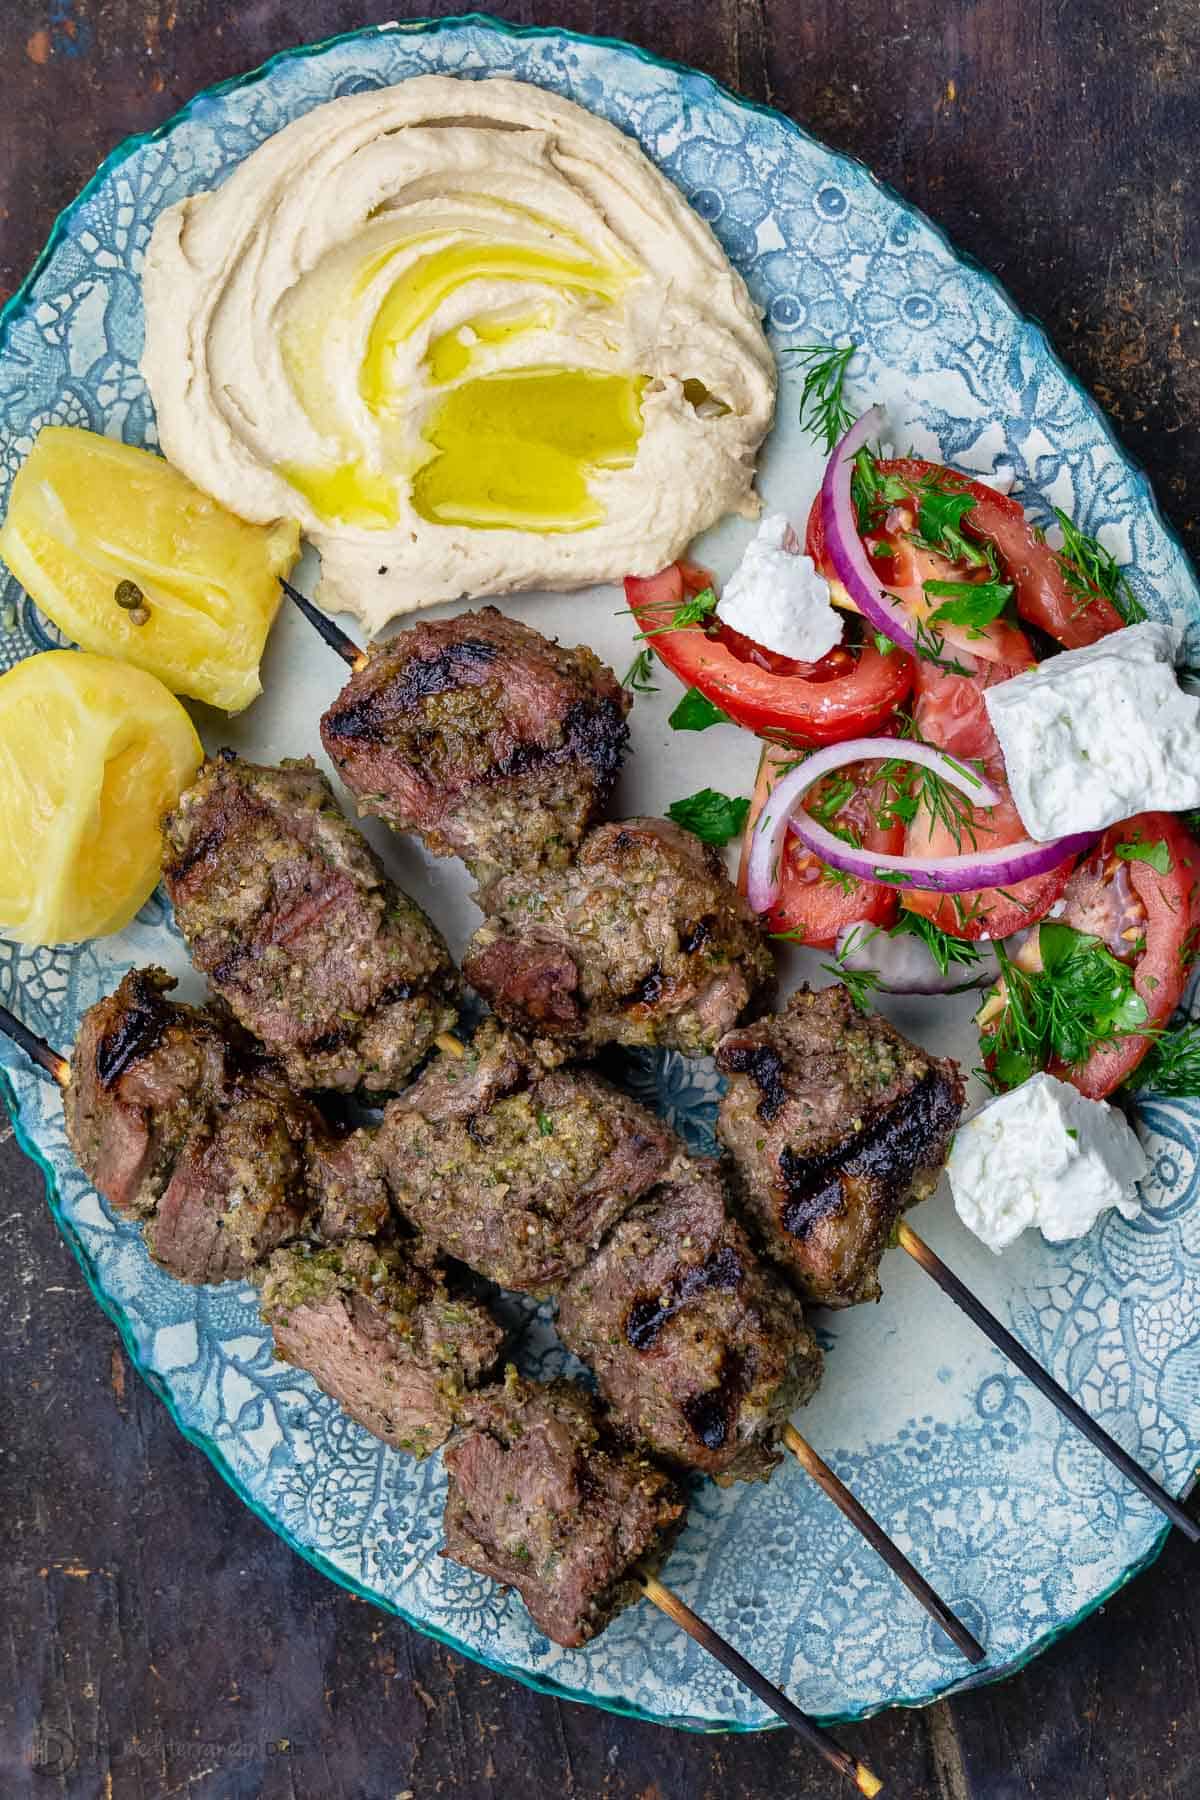 Lamb kabobs served on a plate with a tomato salad and hummus